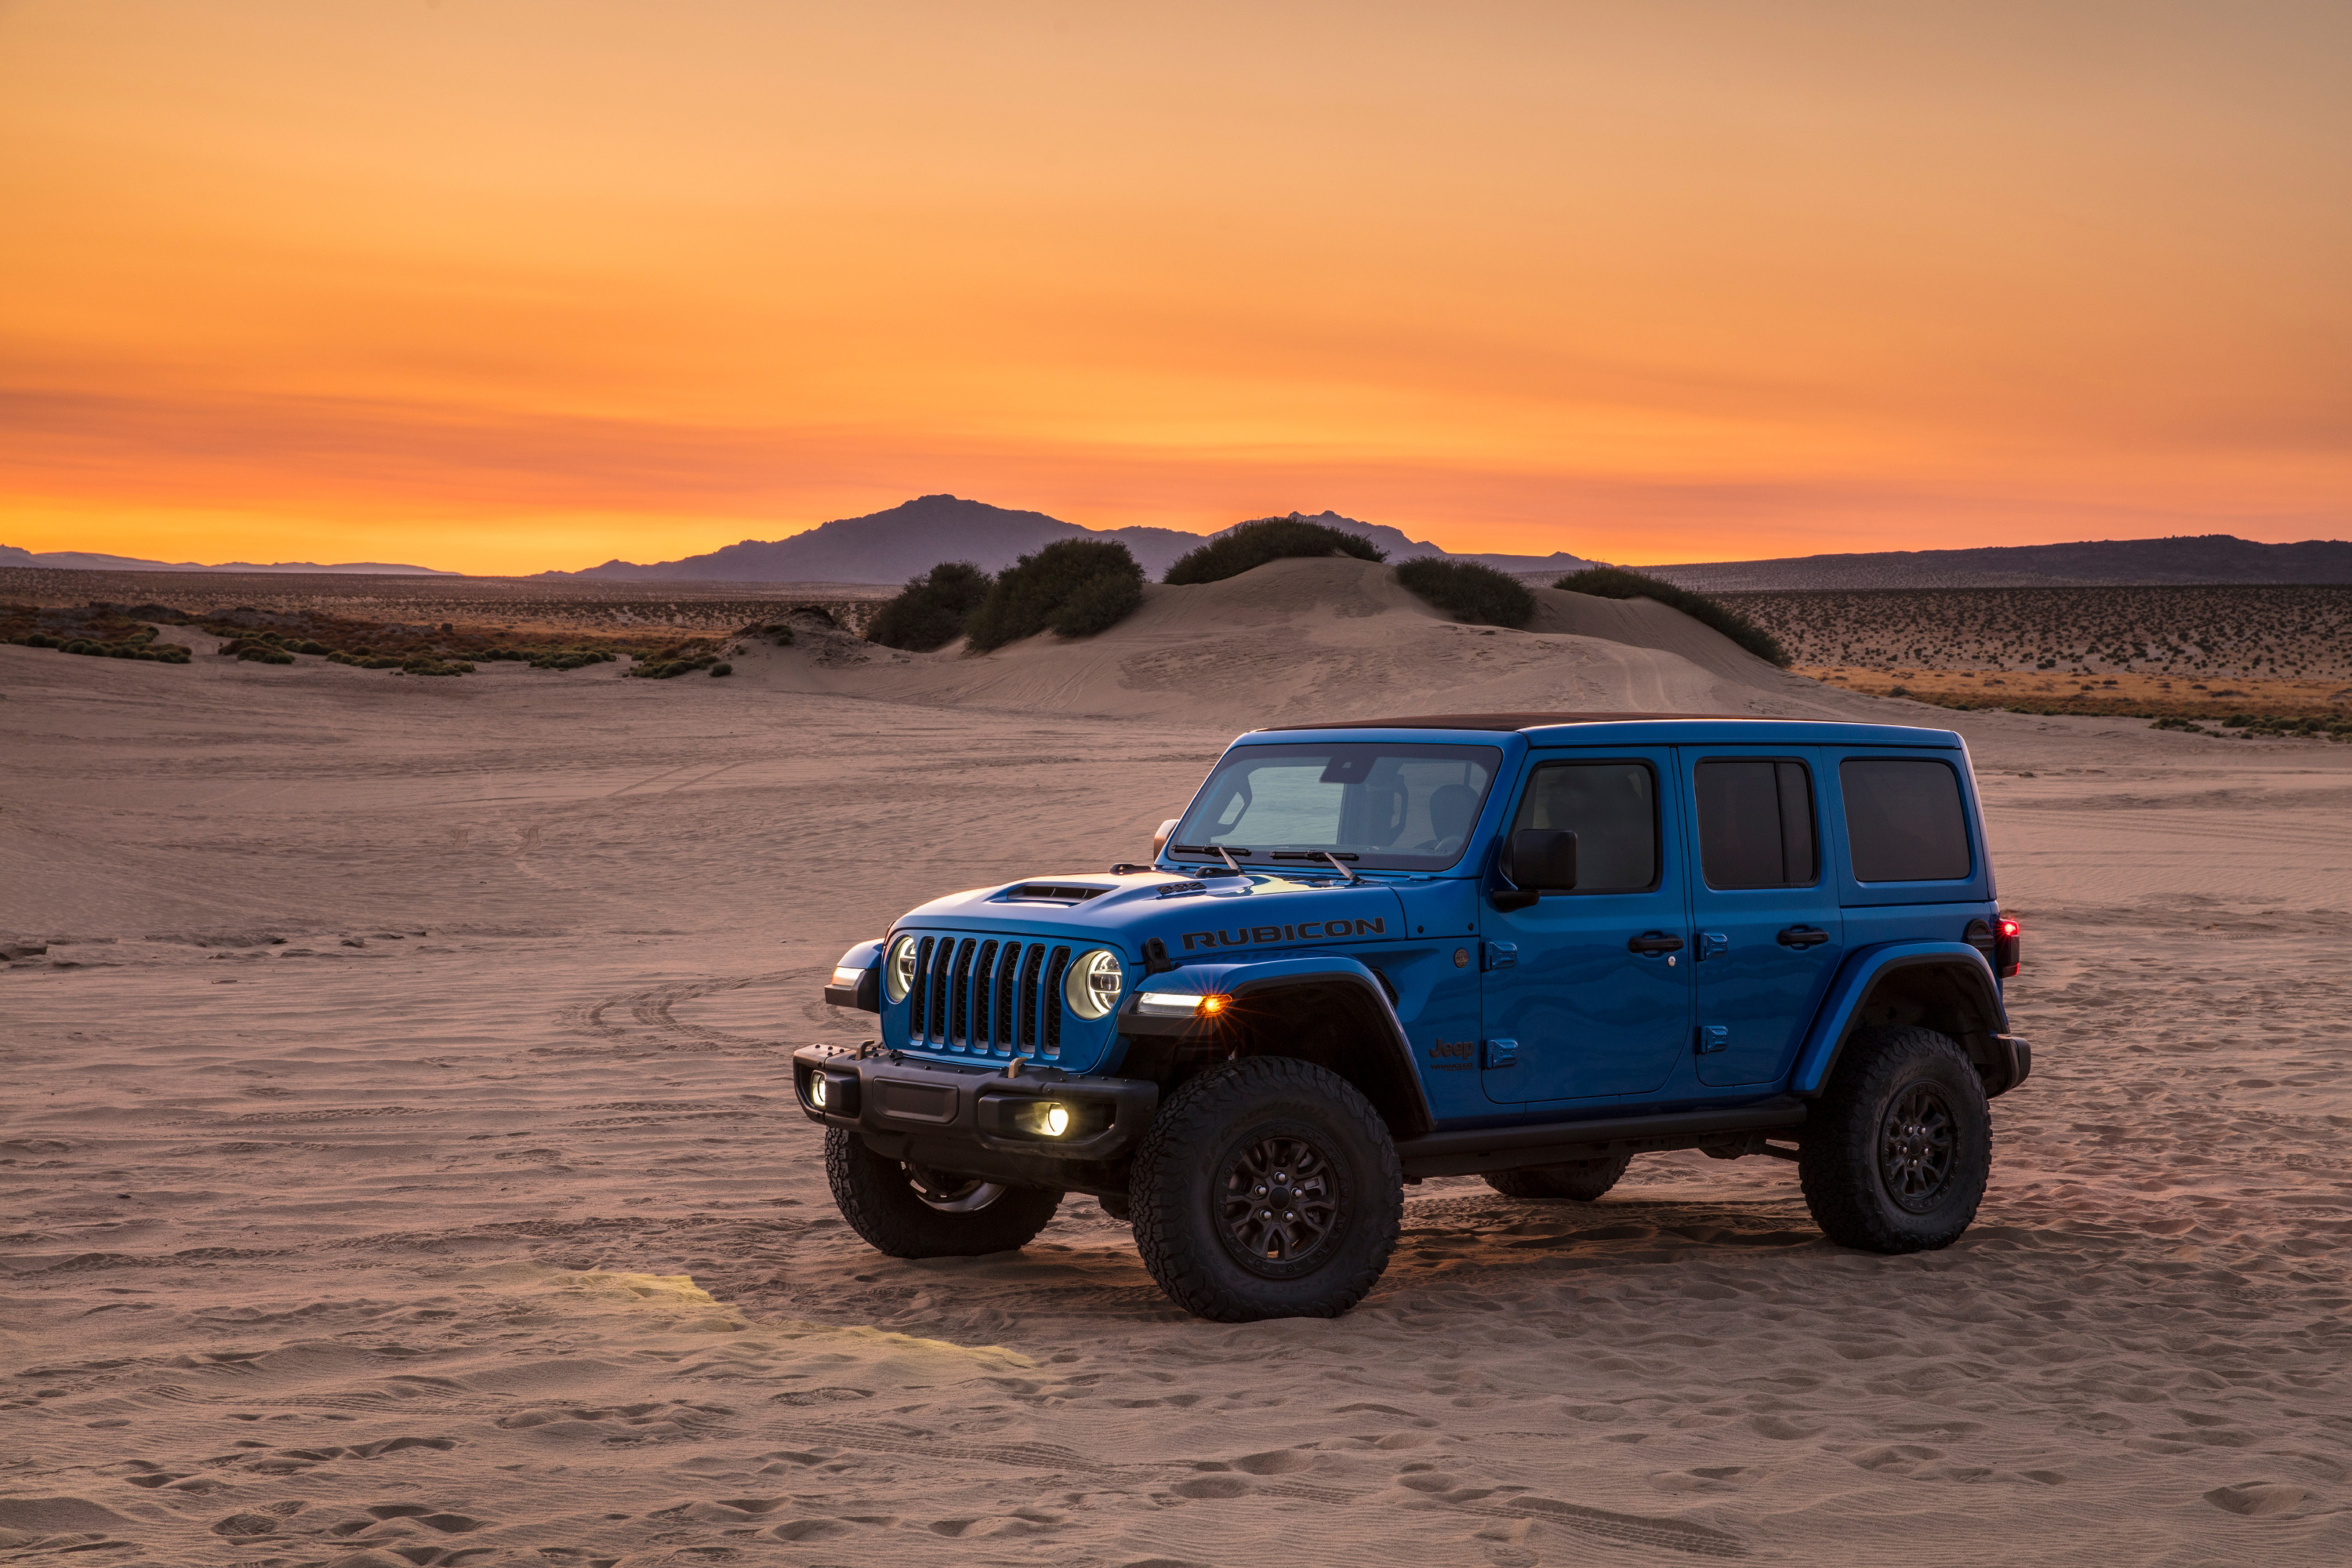 2023 Jeep Wrangler Review Unlimited variety, from 4xe to Rubicon 392